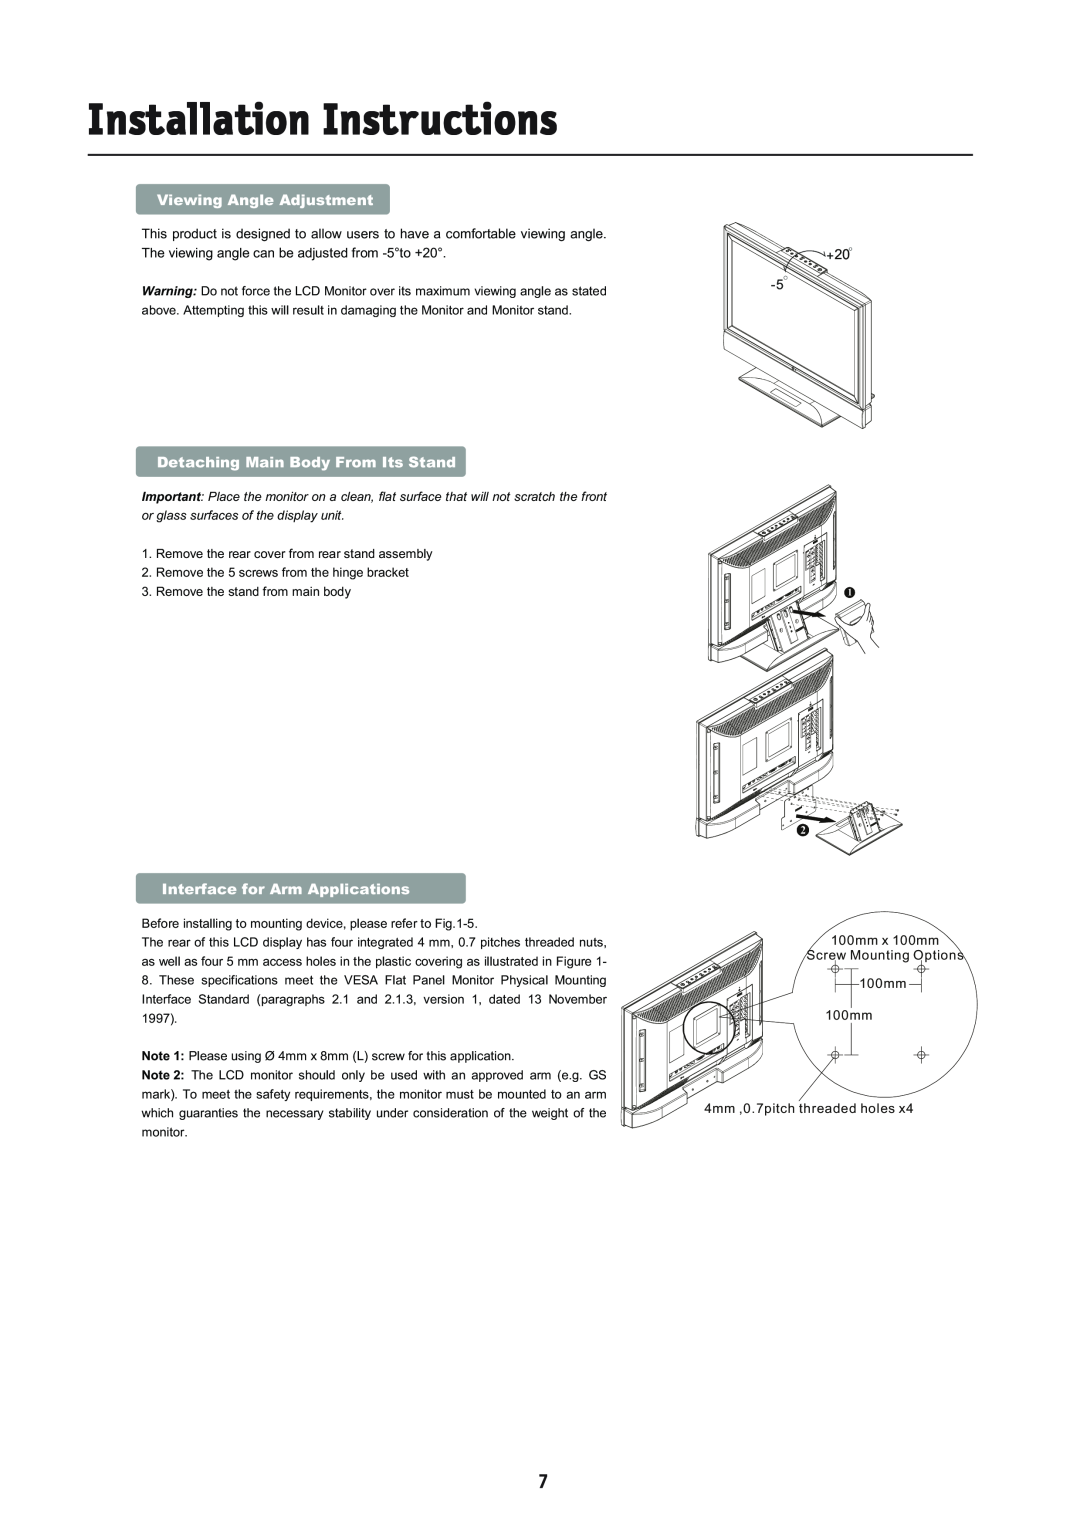 NEC LCD2335WXM, L234GC manual Installation Instructions, Viewing Angle Adjustment, Detaching Main Body From Its Stand 